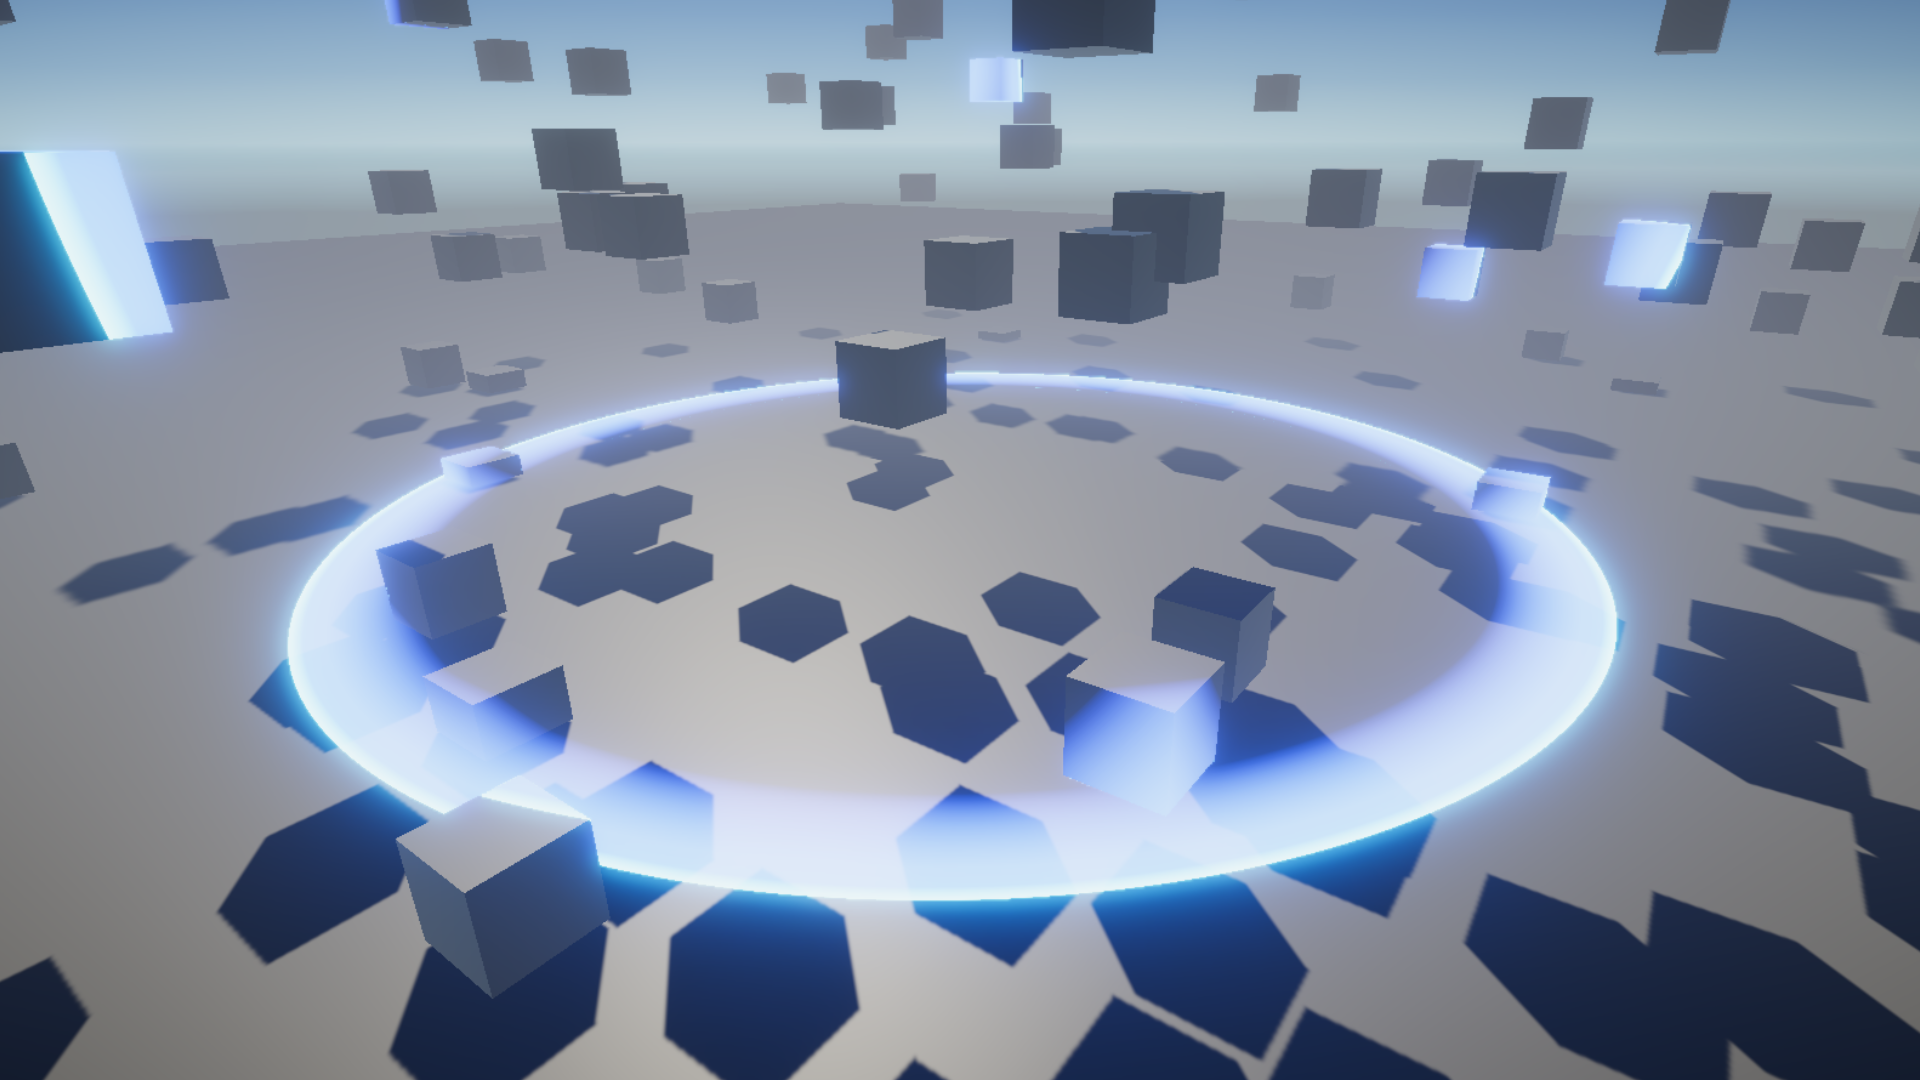 A blue scan effect starting in the air above the floor that has increased in radius, such that the floor and several airborne cubes glow partially blue.